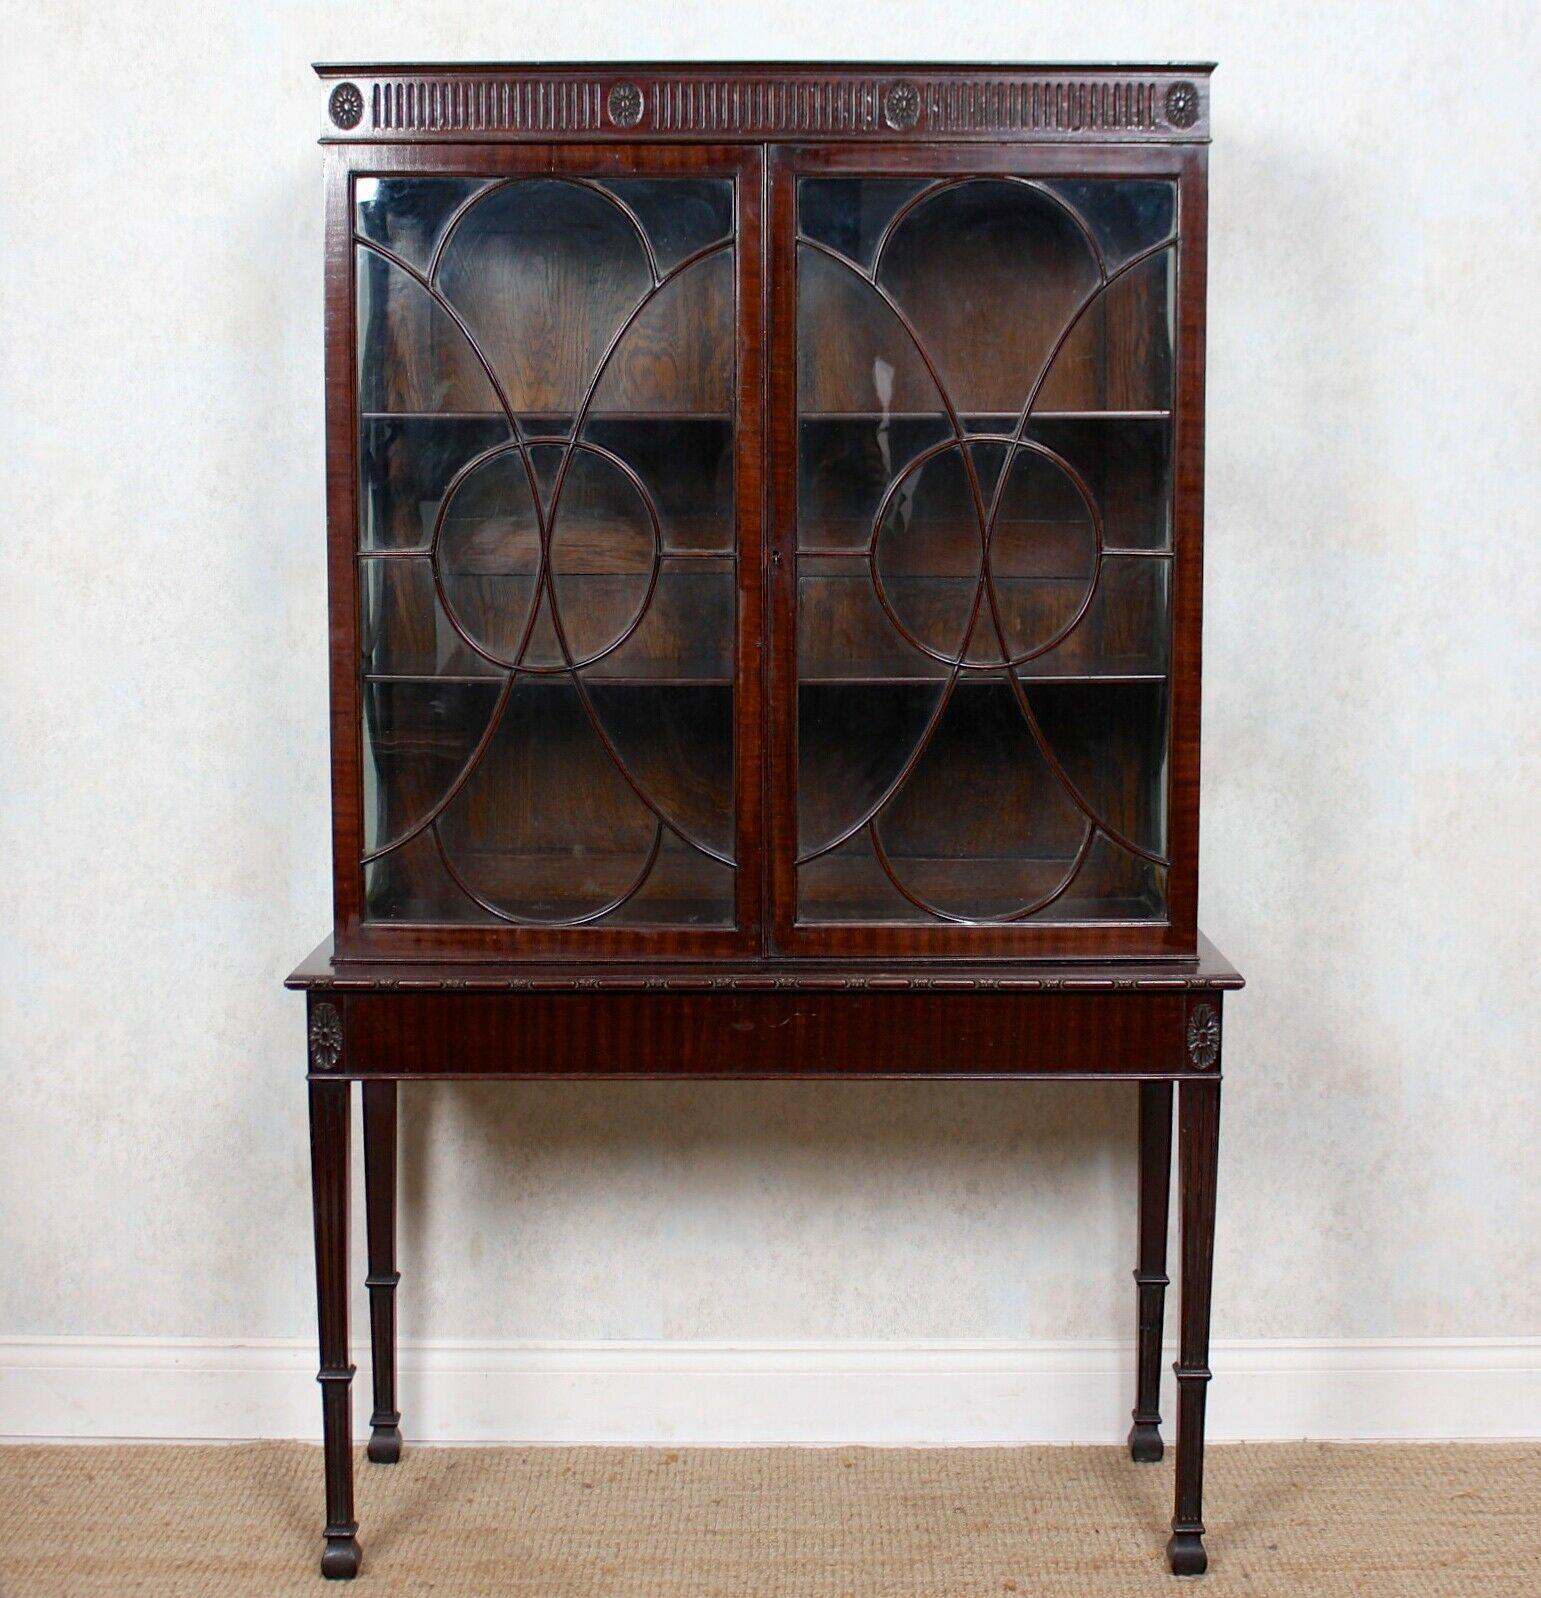 An impressive Edwardian period mahogany display cabinet on stand.

The cornice detailed with flowerhead motifs and reeded borders above astragal glazed doors and sides enclosed shelving. Raised on a stand with mirrored flowerhead motifs on square